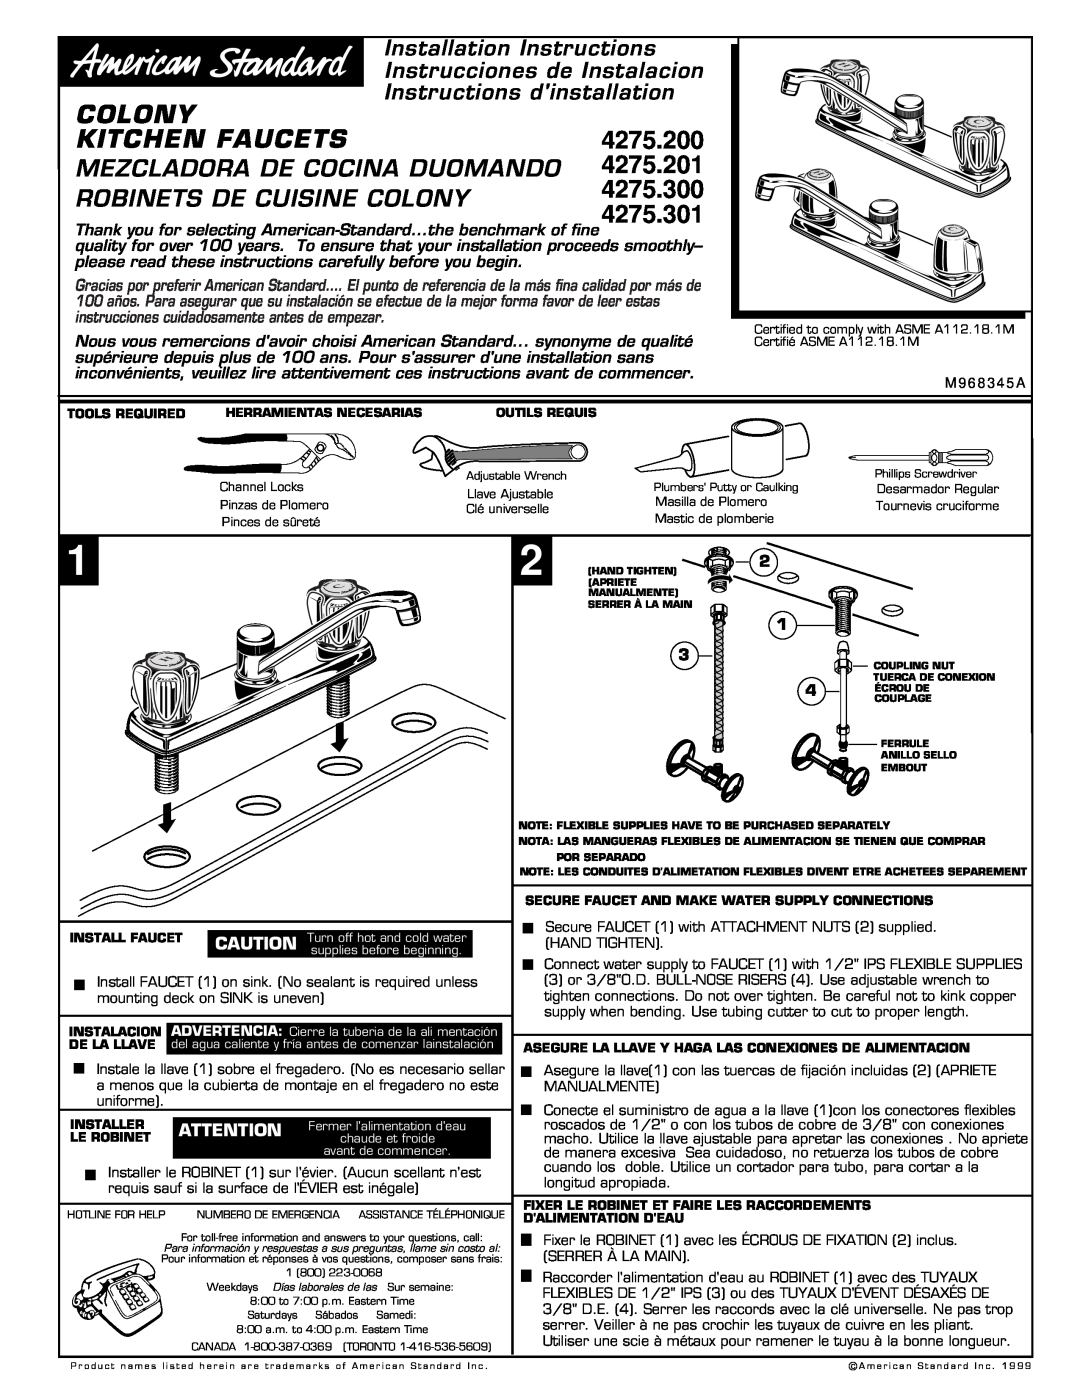 American Standard 4275.200 installation instructions Colony, Kitchen Faucets, 4275.201, 4275.300, 4275.301 